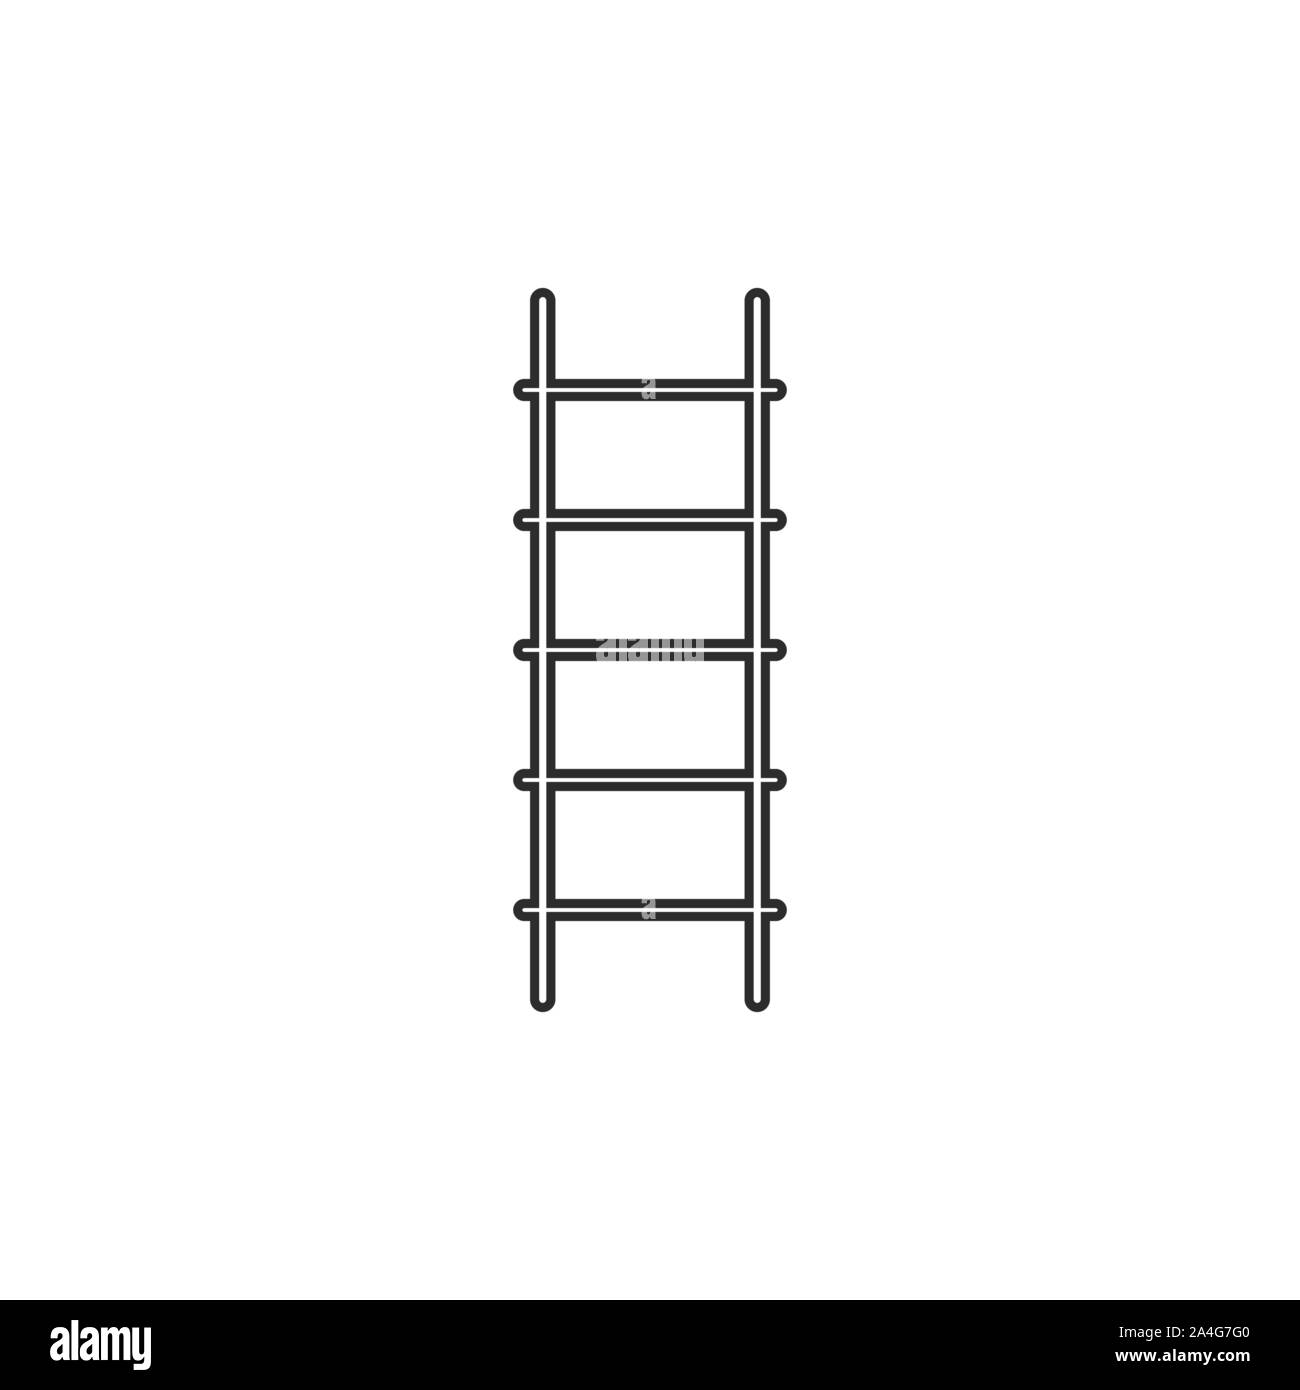 Ladder, Stairs icon. Vector illustration, flat design. Stock Vector